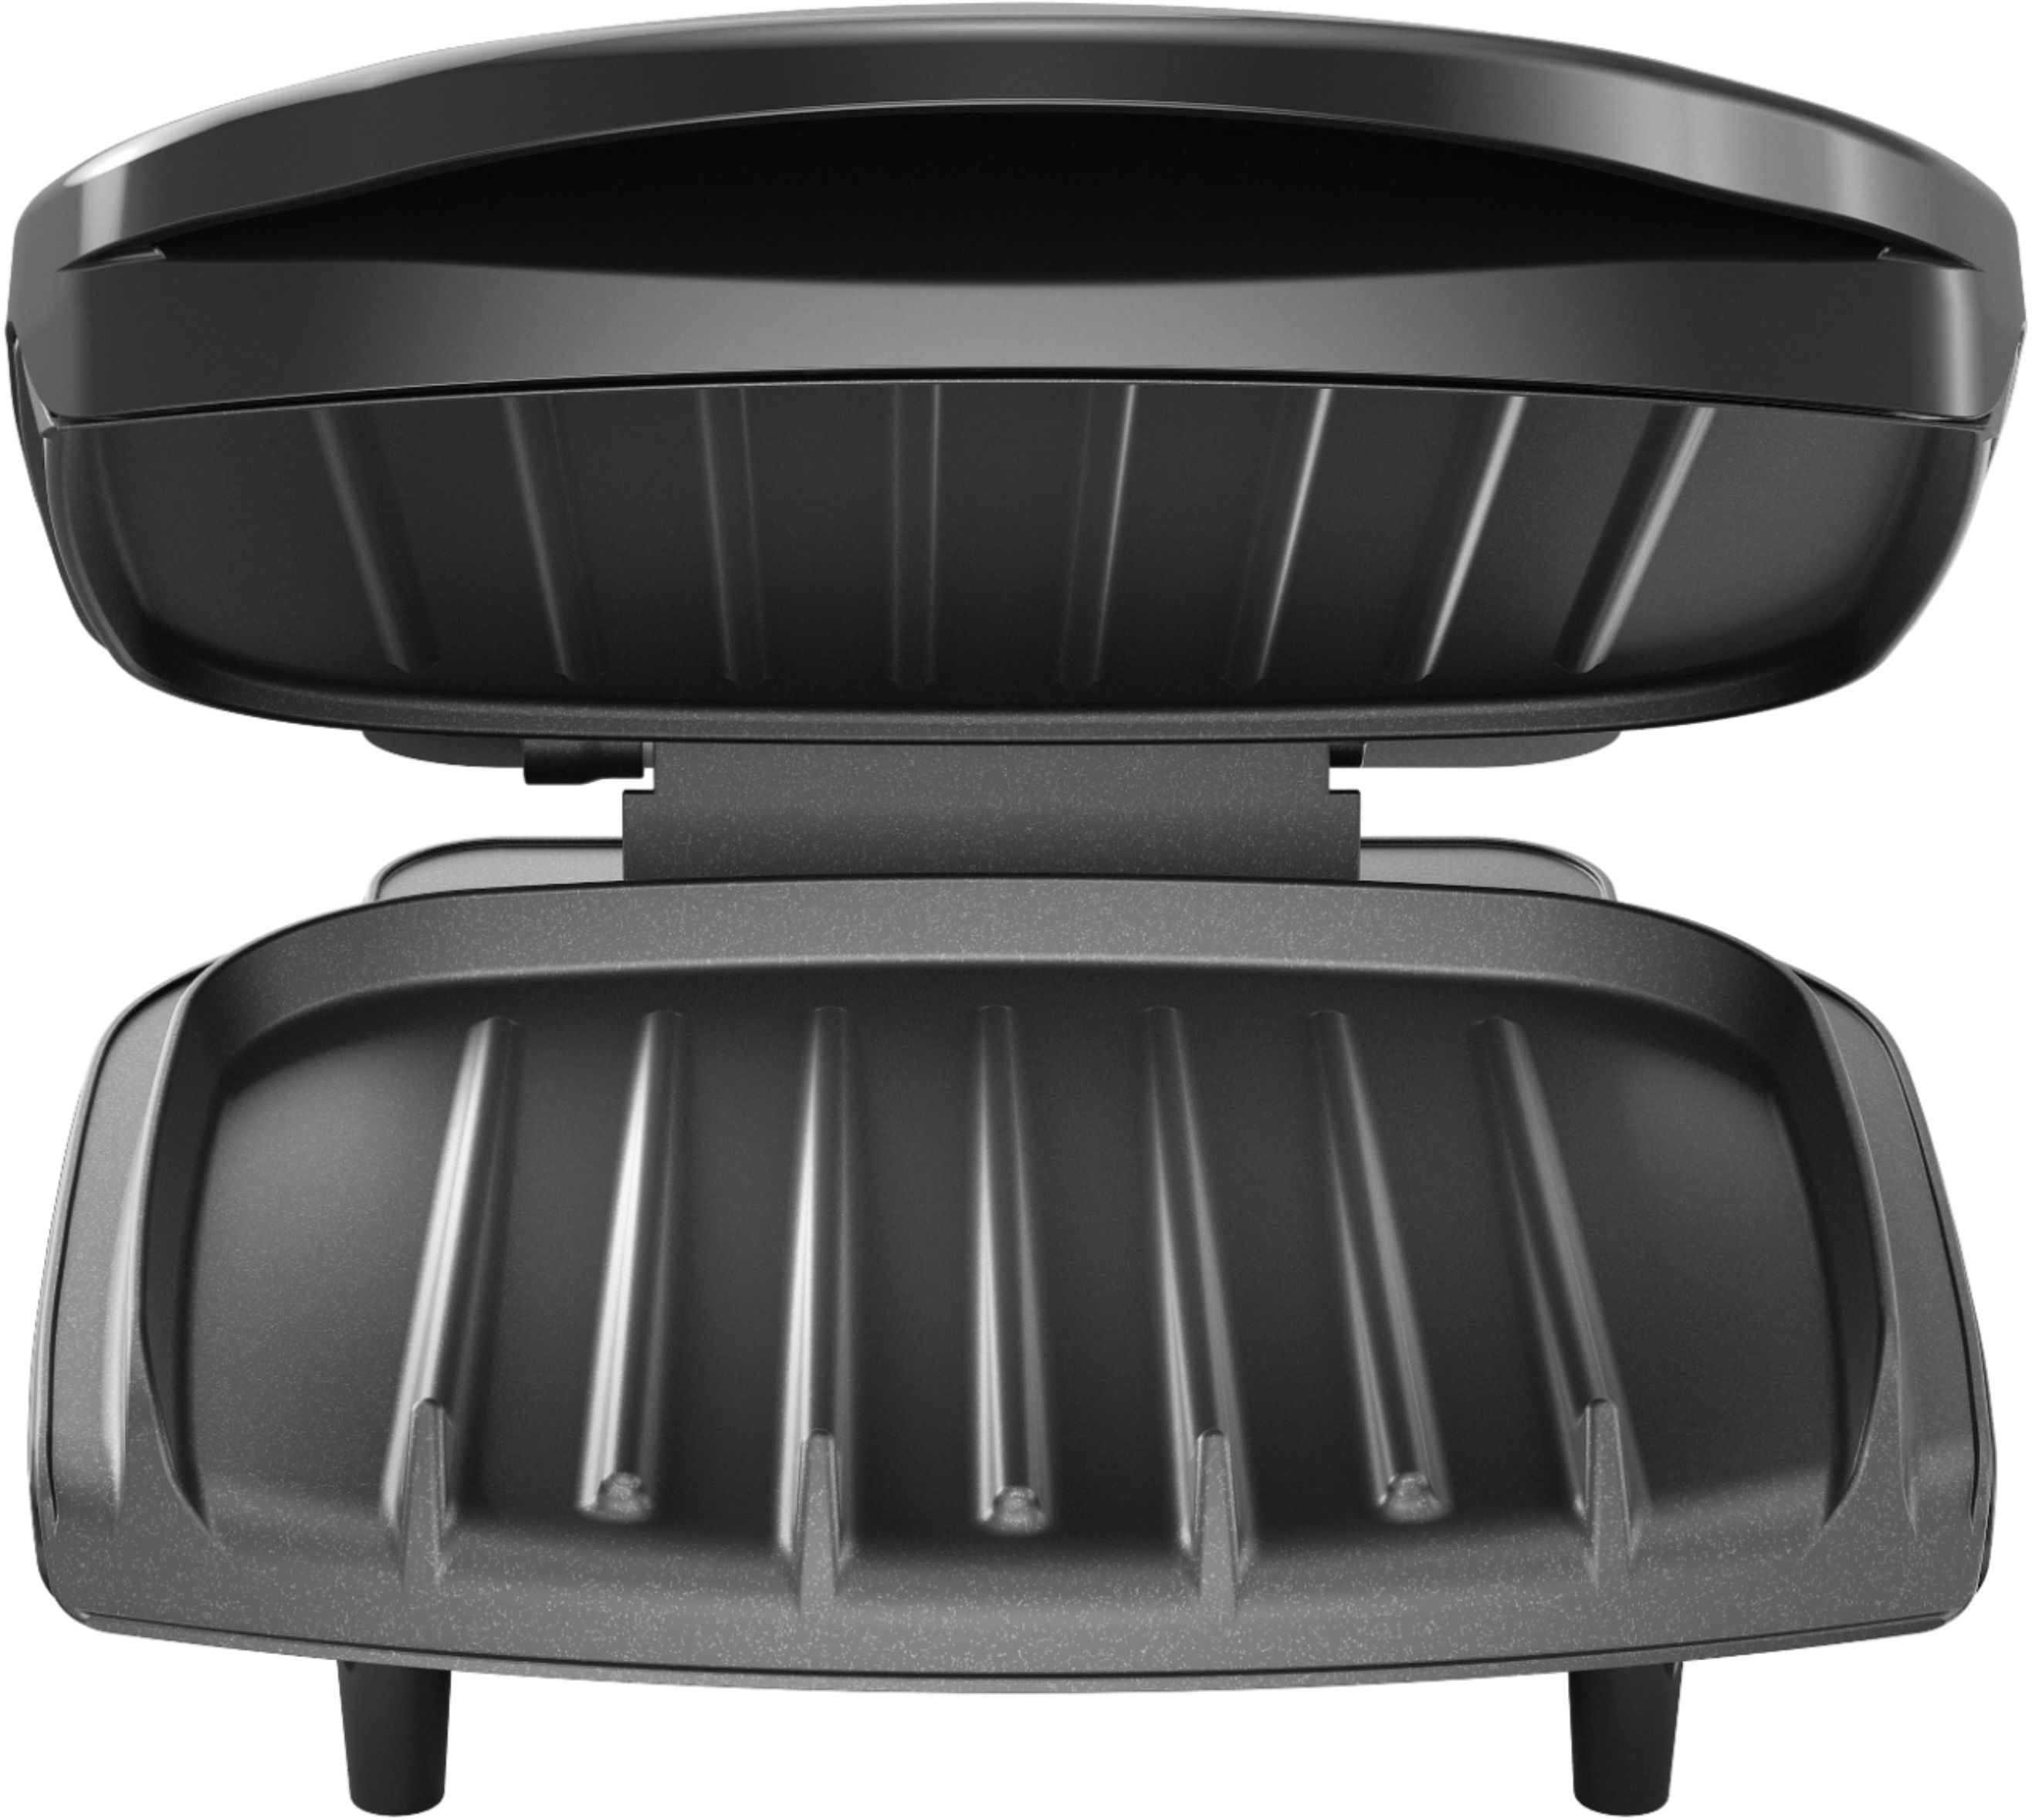 George Foreman Electric Indoor/Outdoor Grill - general for sale